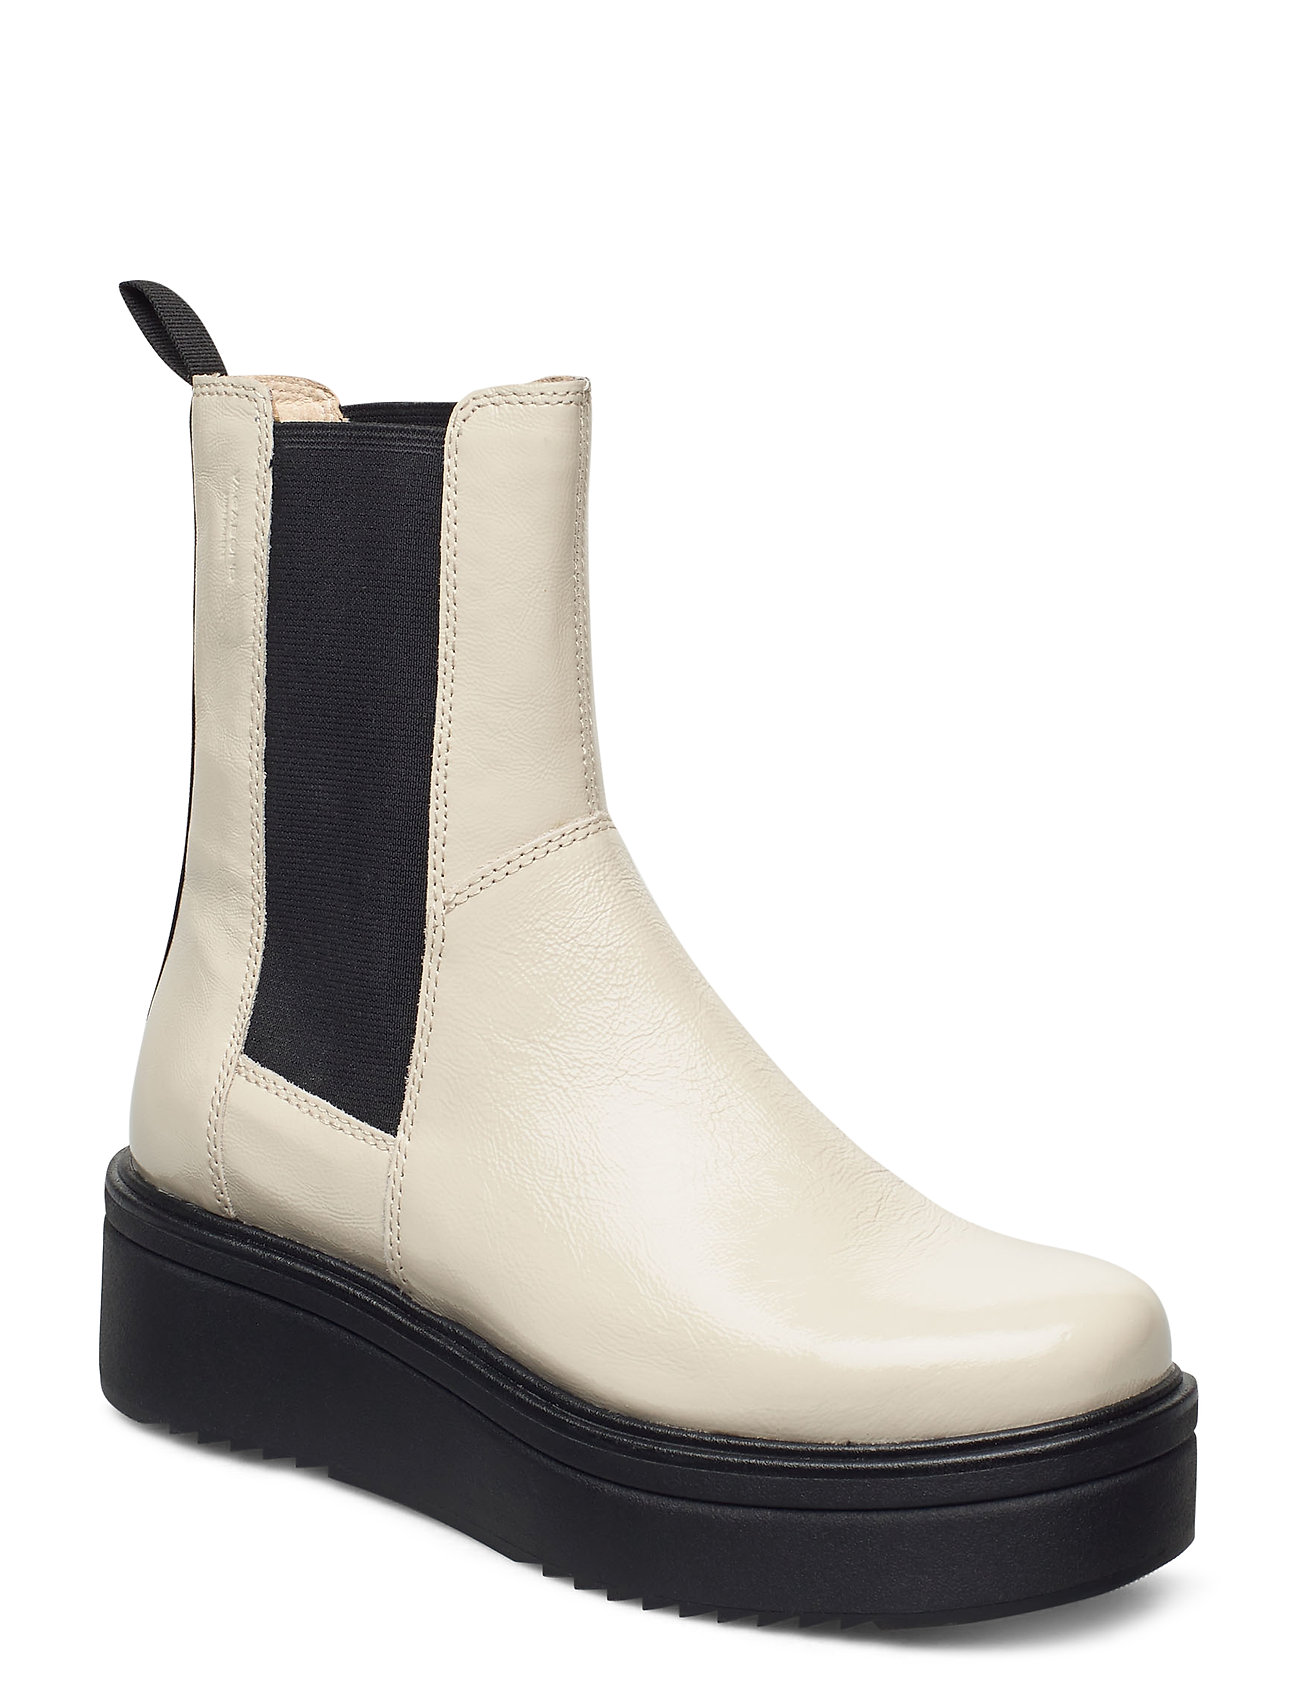 Tara Shoes Chelsea Boots Ankle Boots Ankle Boot - Flat Valkoinen VAGABOND